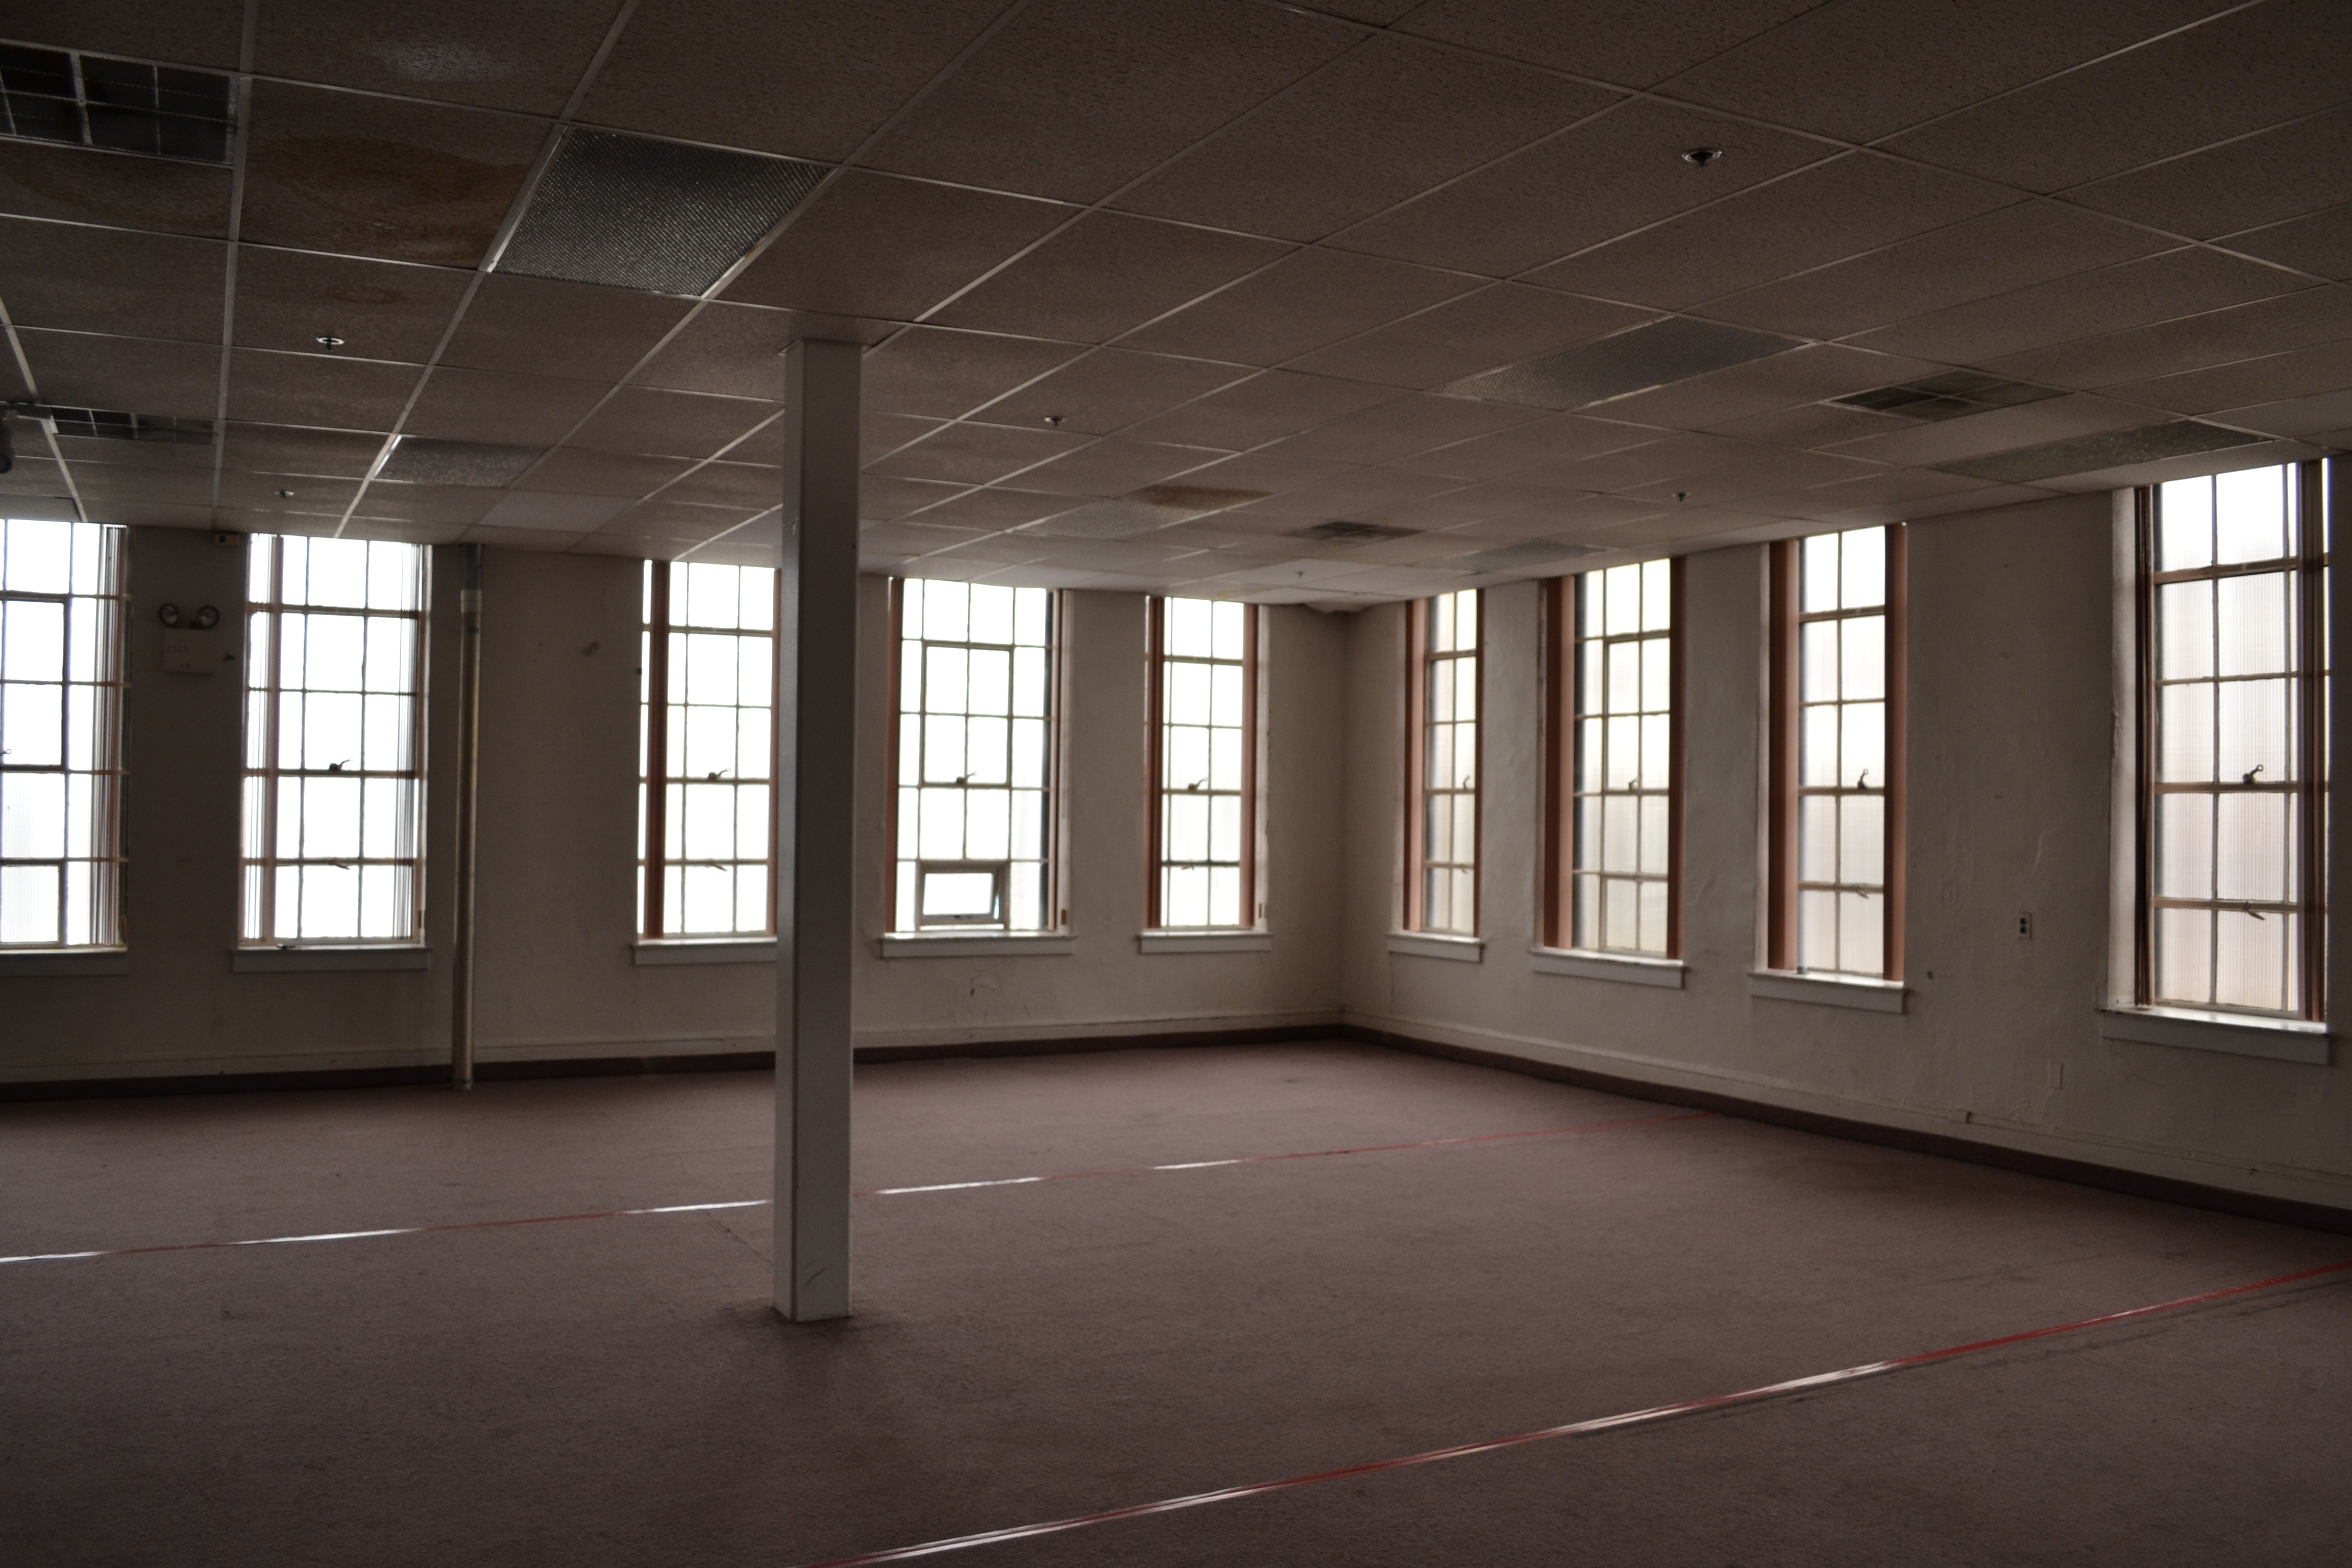 Space formerly used as a chapel for the building's employees will be converted into office or meeting space